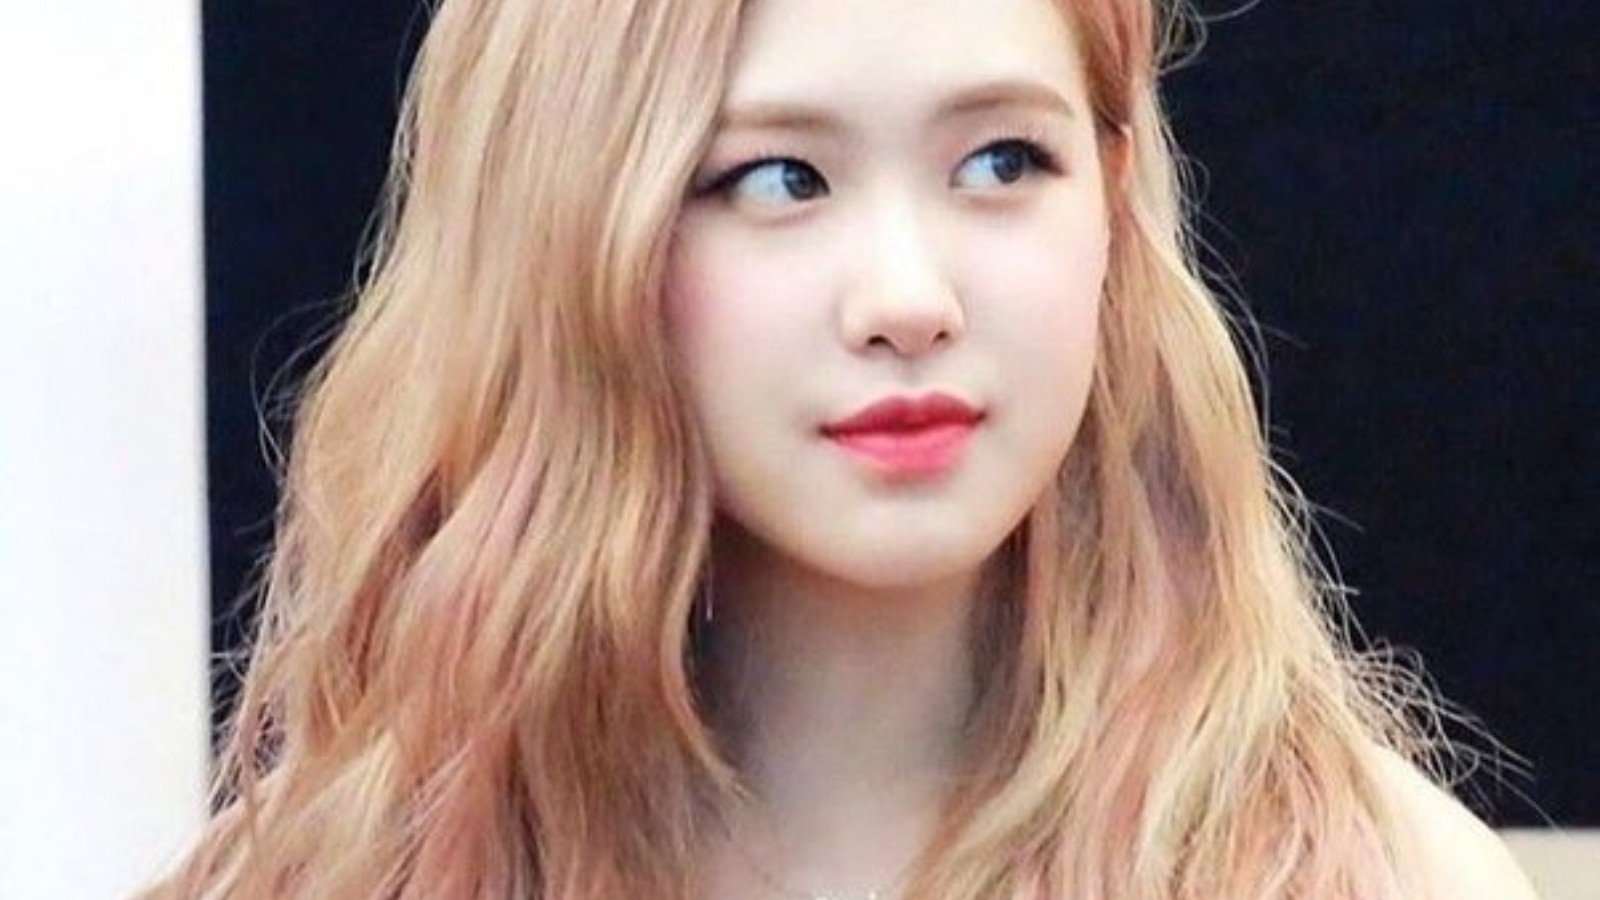 Roseanne Park Biography Age, Height, Birthday, Family, Net Worth